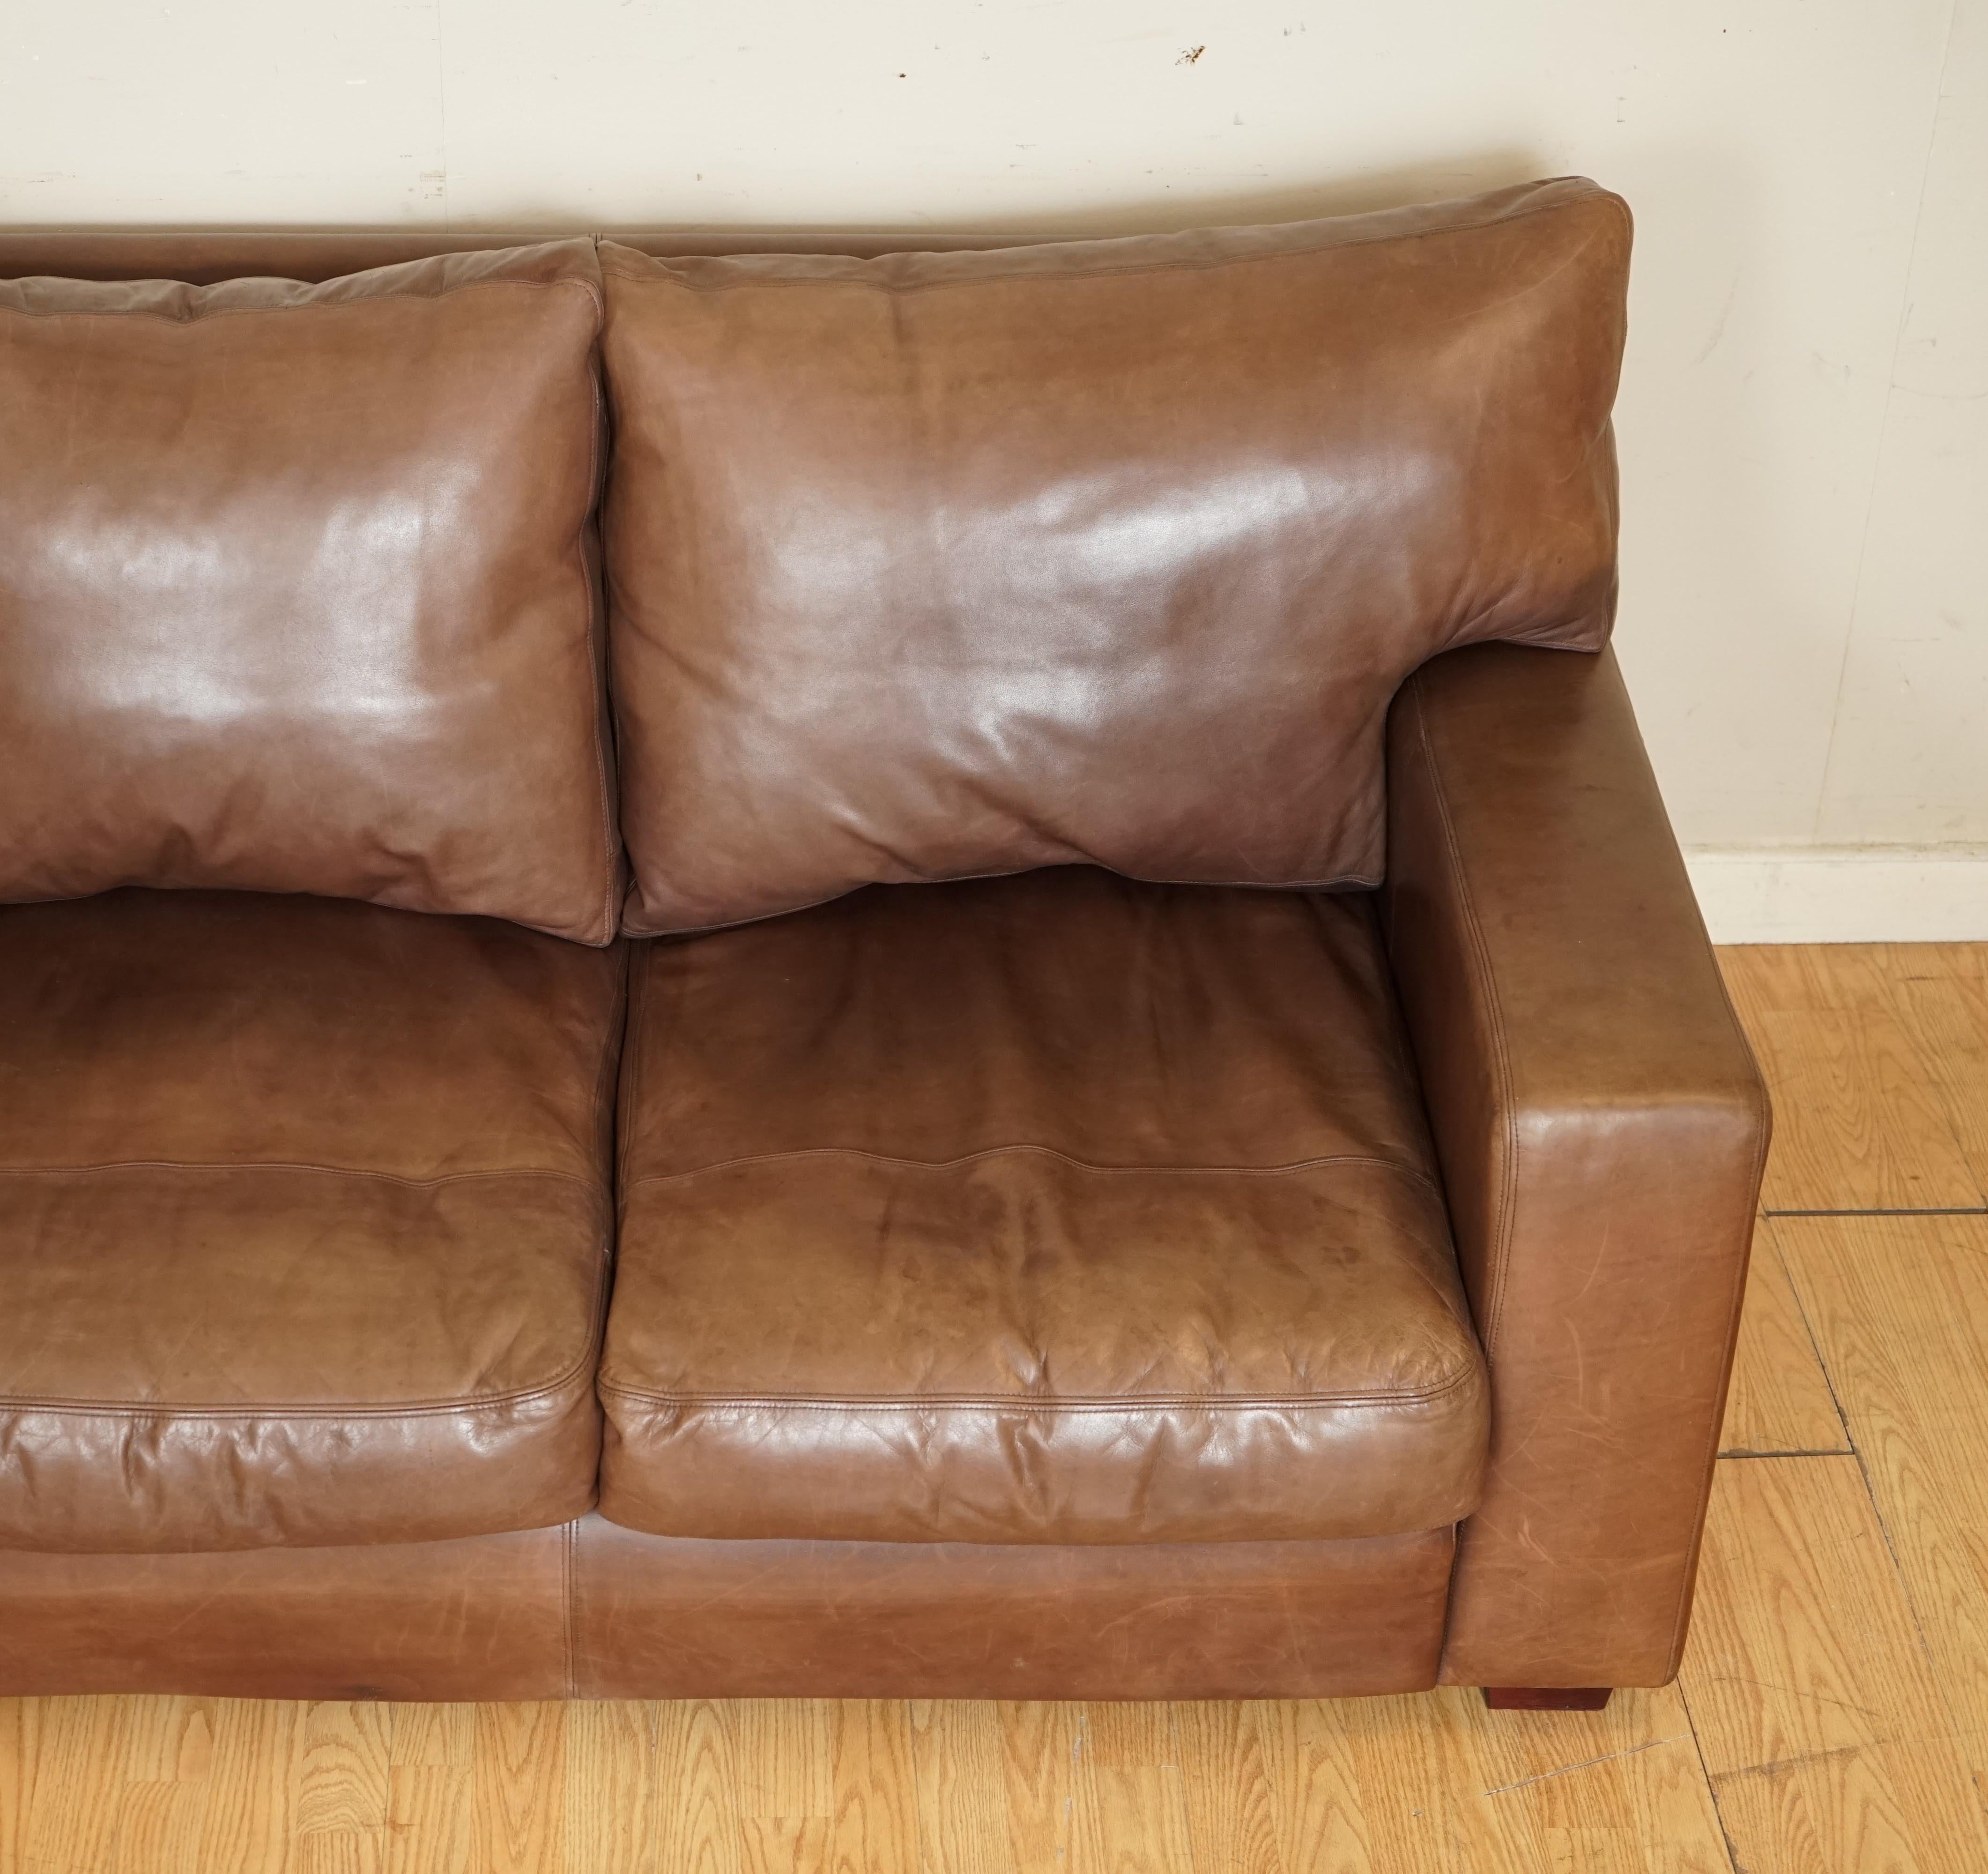 British Collins & Hayes Buttery Soft Leather Three Seater Sofa with Feather Filled Back